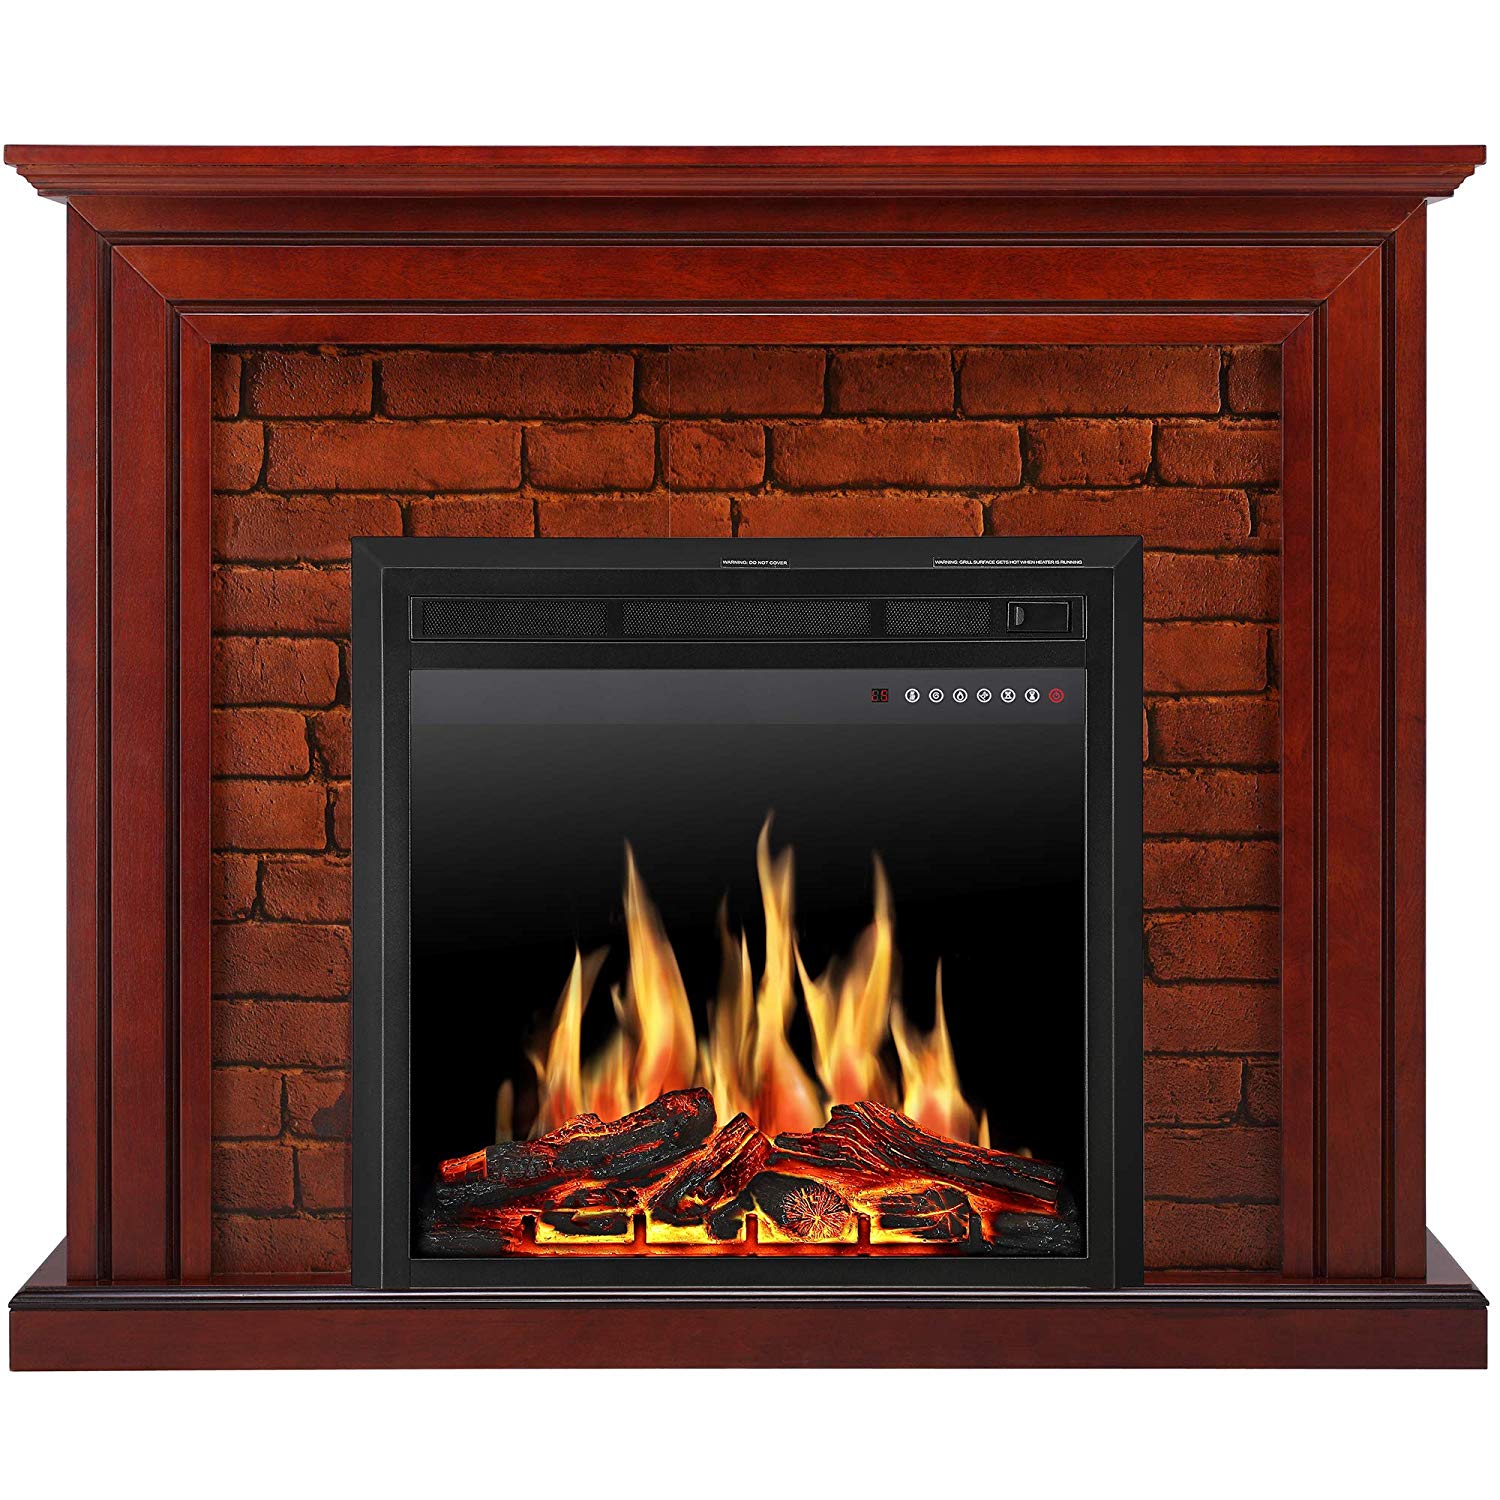 Black Freestanding Electric Fireplace Elegant Jamfly Electric Fireplace Mantel Package Traditional Brick Wall Design Heater with Remote Control and Led touch Screen Home Accent Furnishings